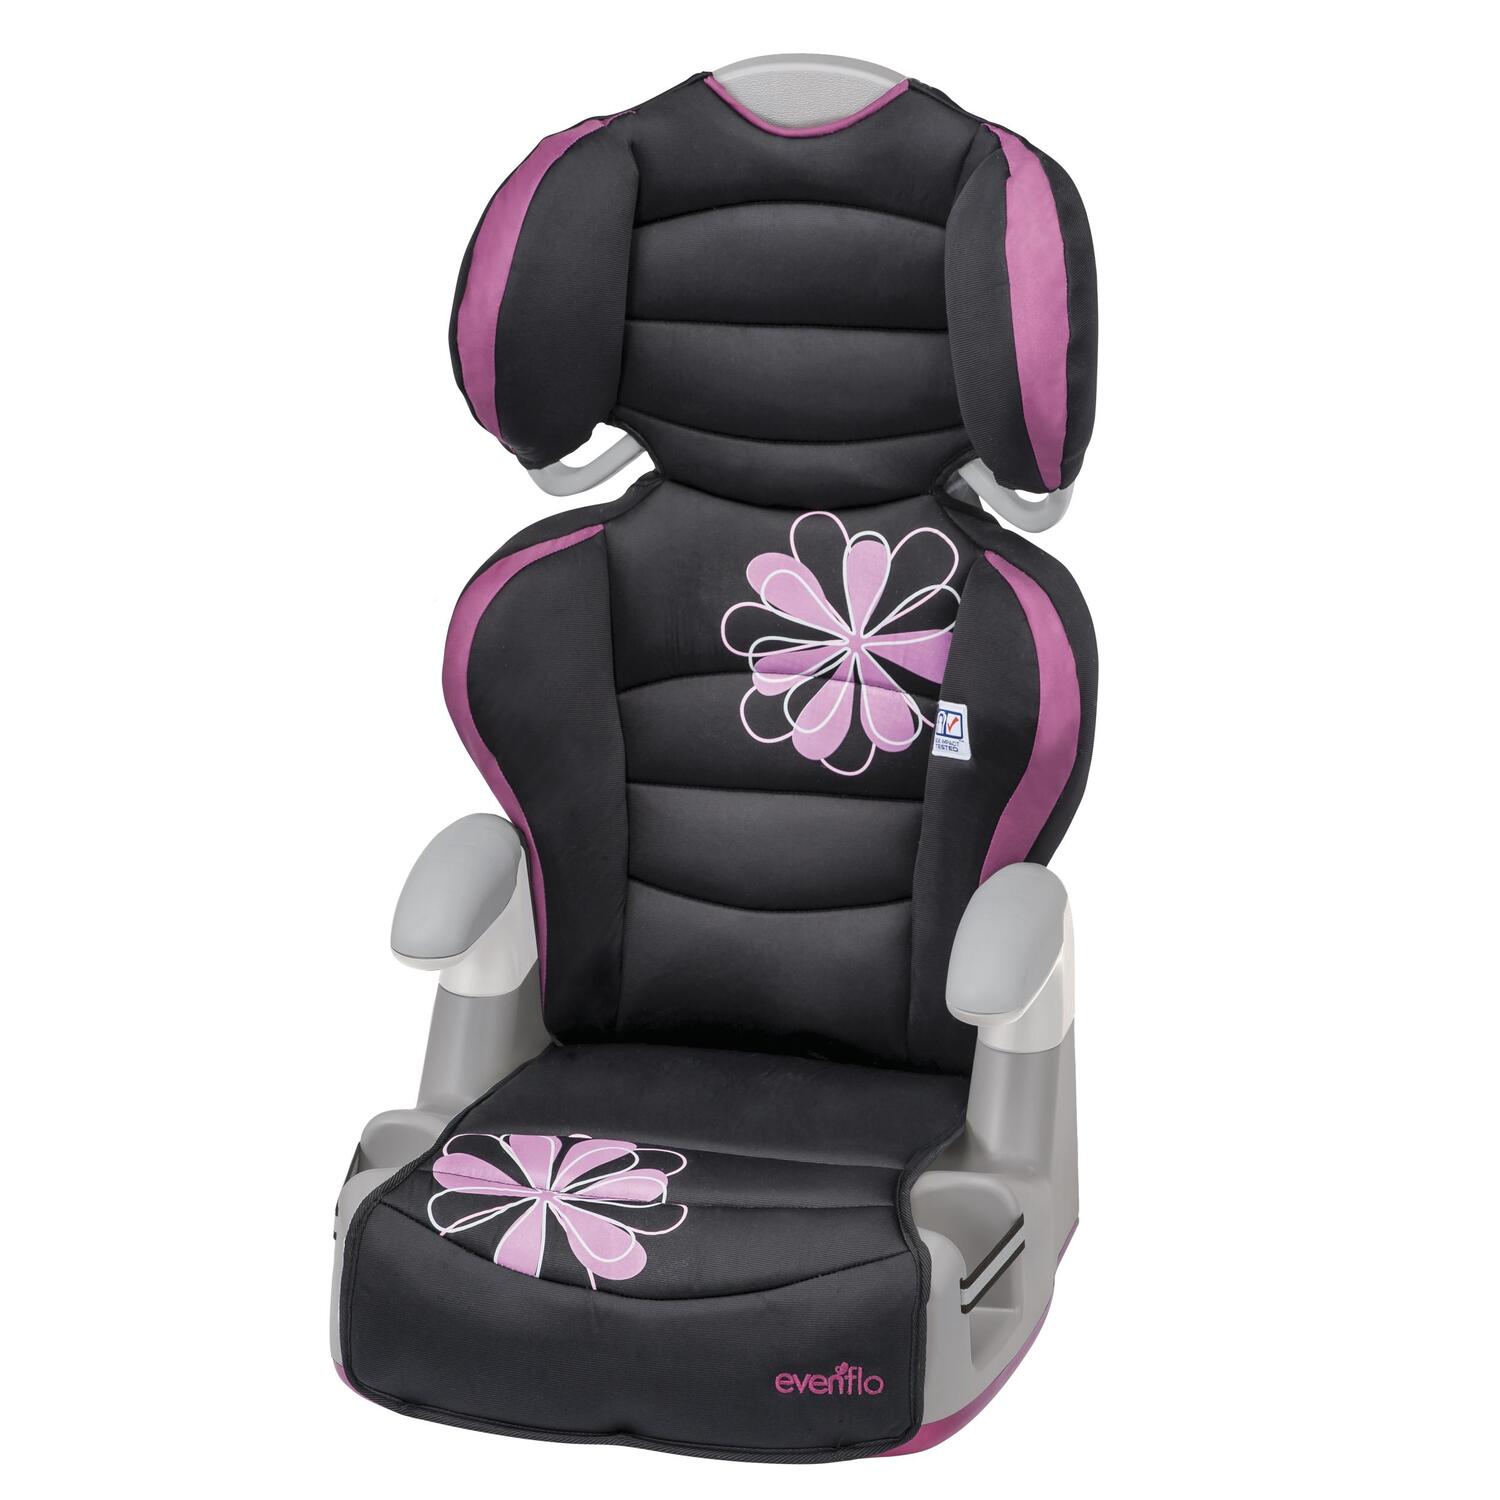 Evenflo Big Kid LX High Back Booster Car Seat, Carrissa - image 1 of 5